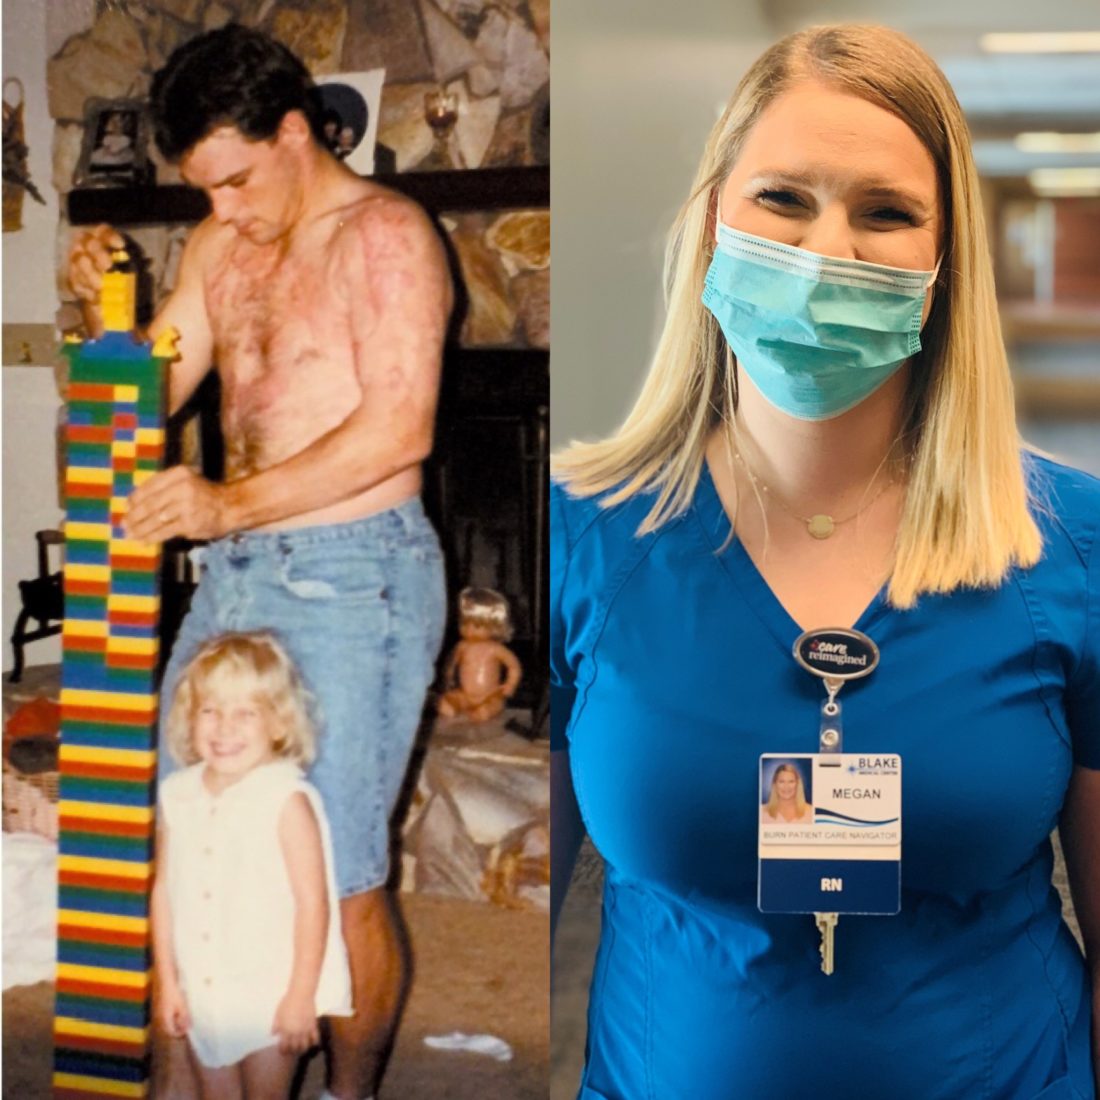 On right, a woman wearing scrubs and a face mask, and on left, a childhood photo of the woman and her father.